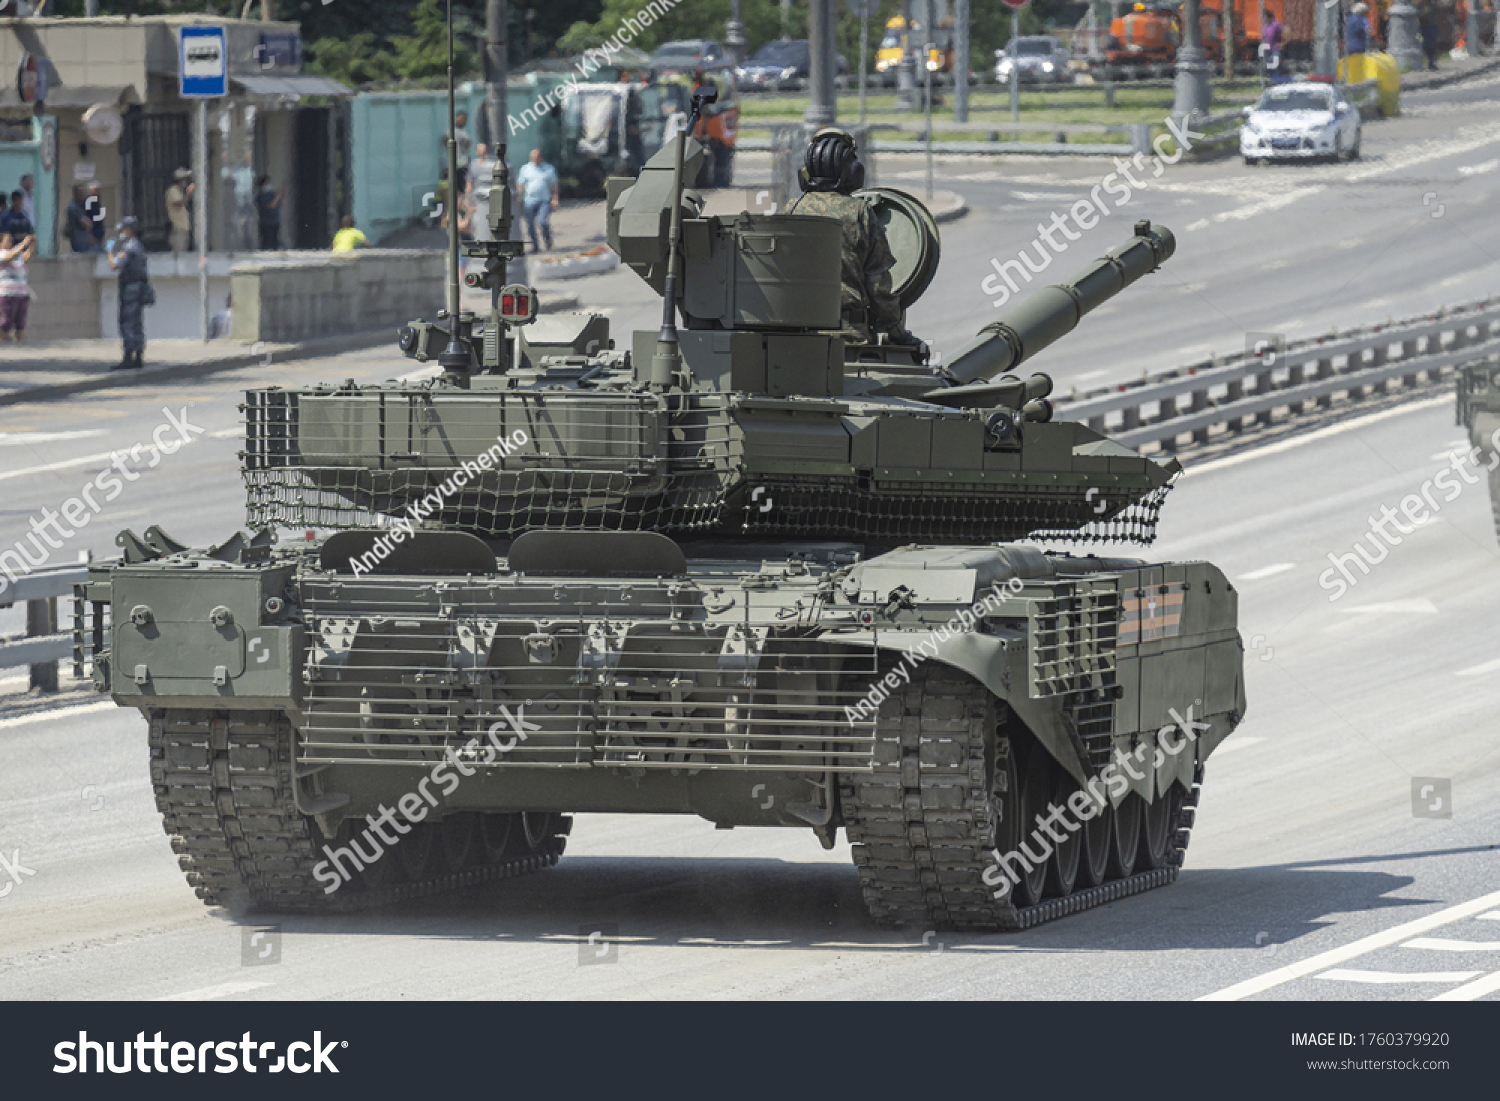 https://image.shutterstock.com/z/stock-photo-june-moscow-russia-the-t-m-tank-returns-after-participating-in-the-rehearsal-of-the-1760379920.jpg